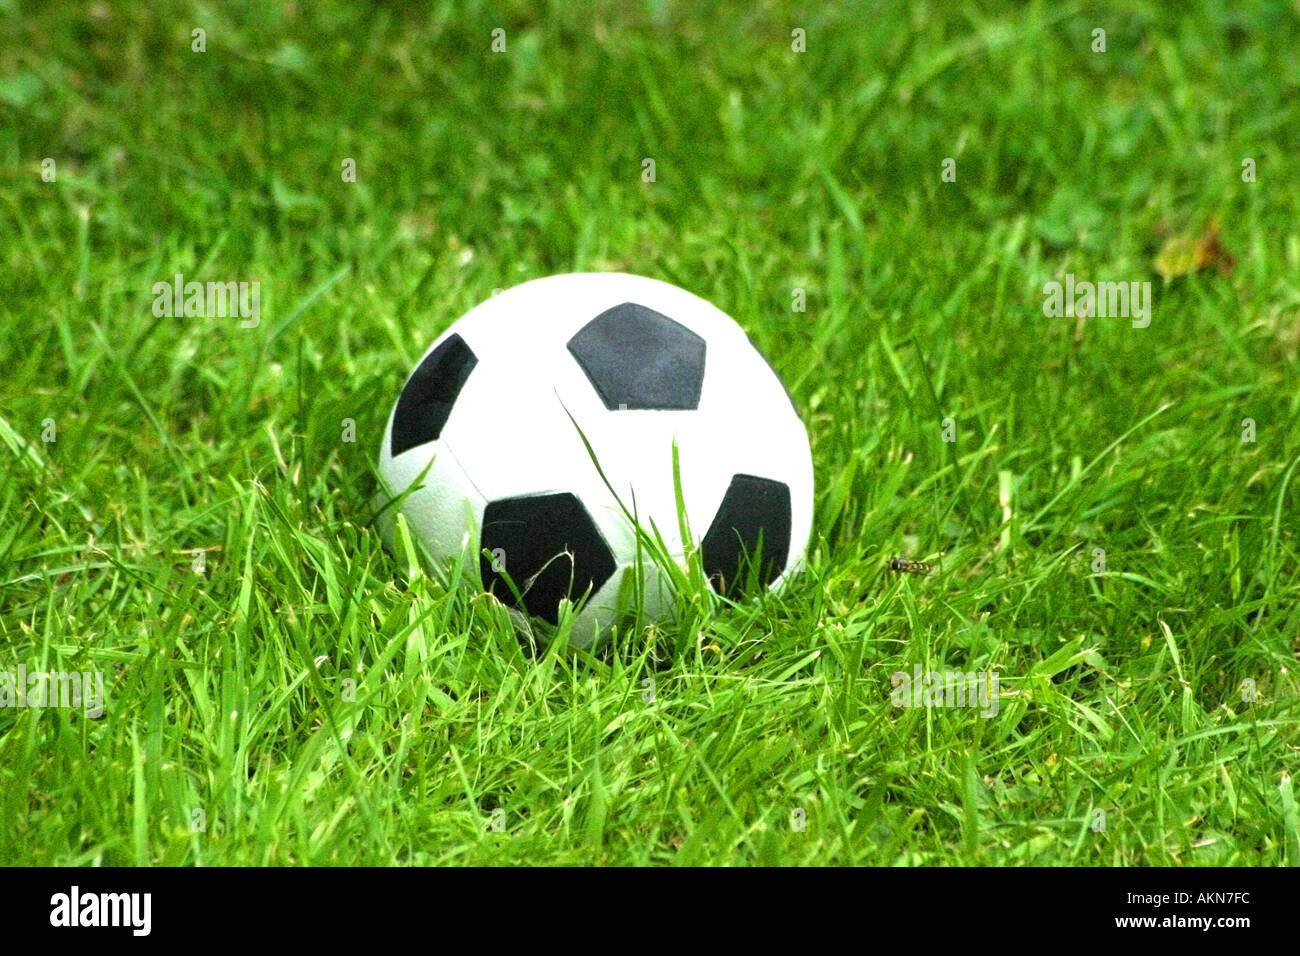 1970s Football in nestled in long grass symbolic of aging of some of the great stars of that era football sport pitch ball bla Stock Photo